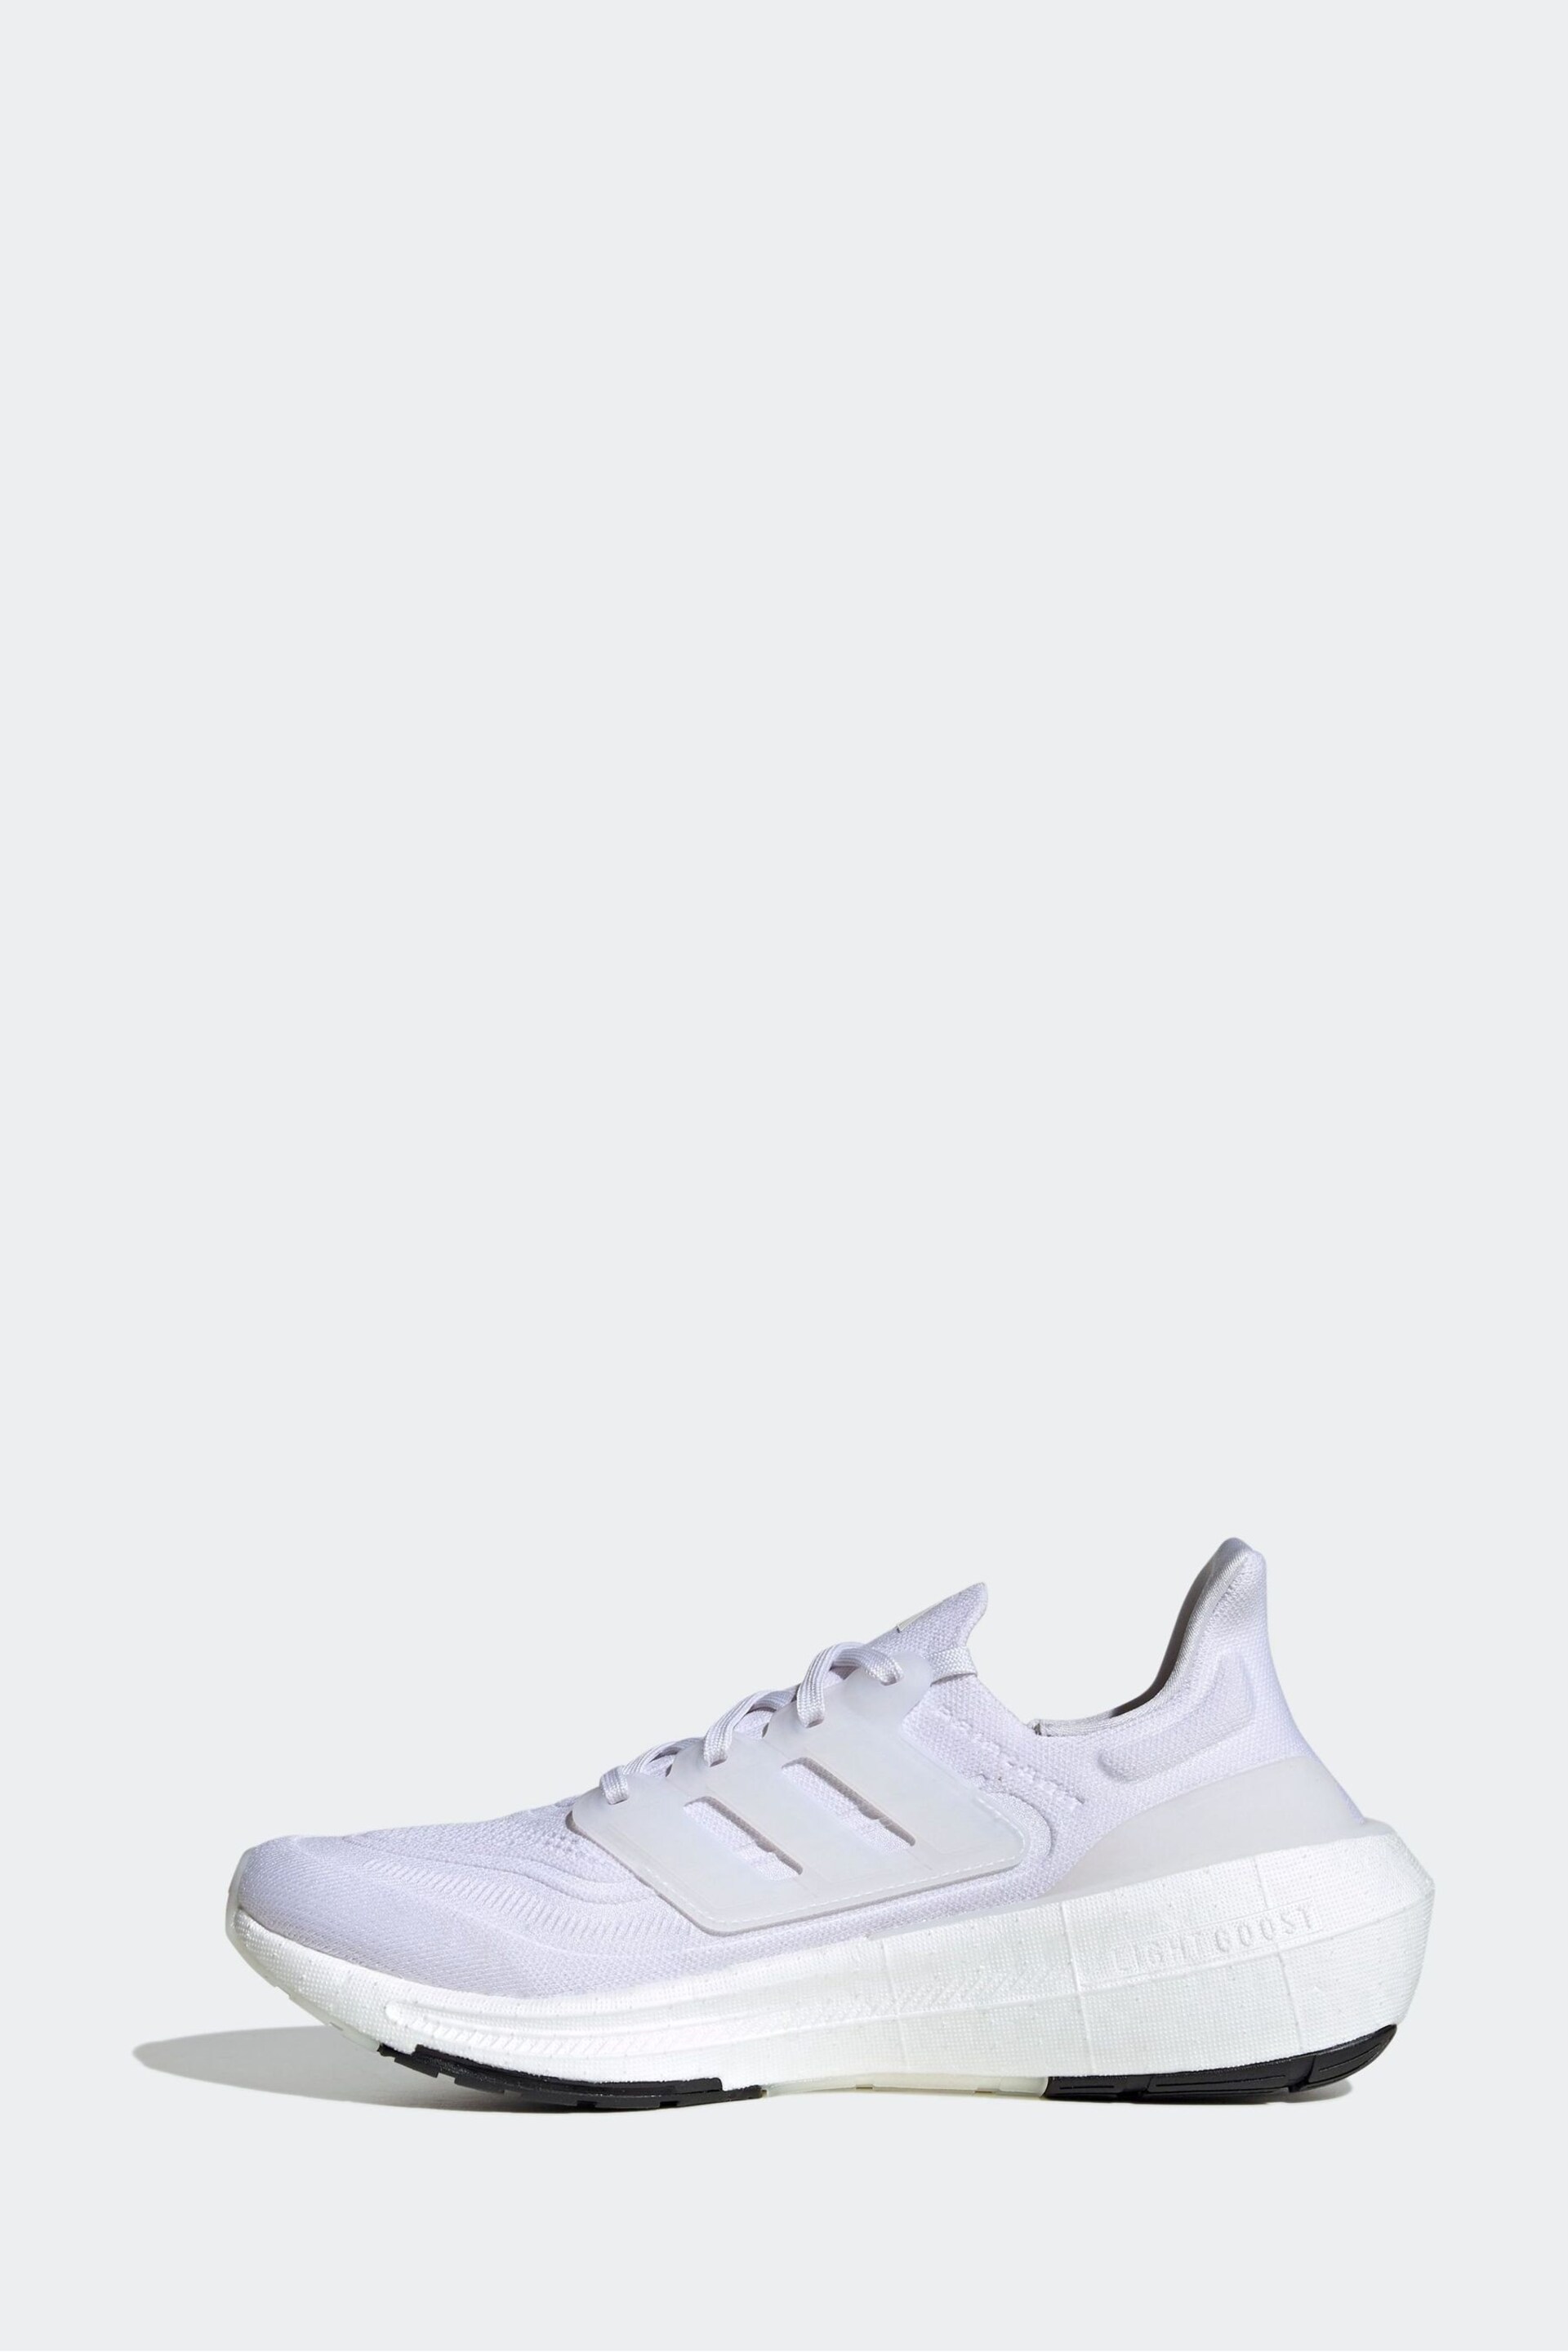 adidas White Ultraboost Light Trainers - Image 3 of 12